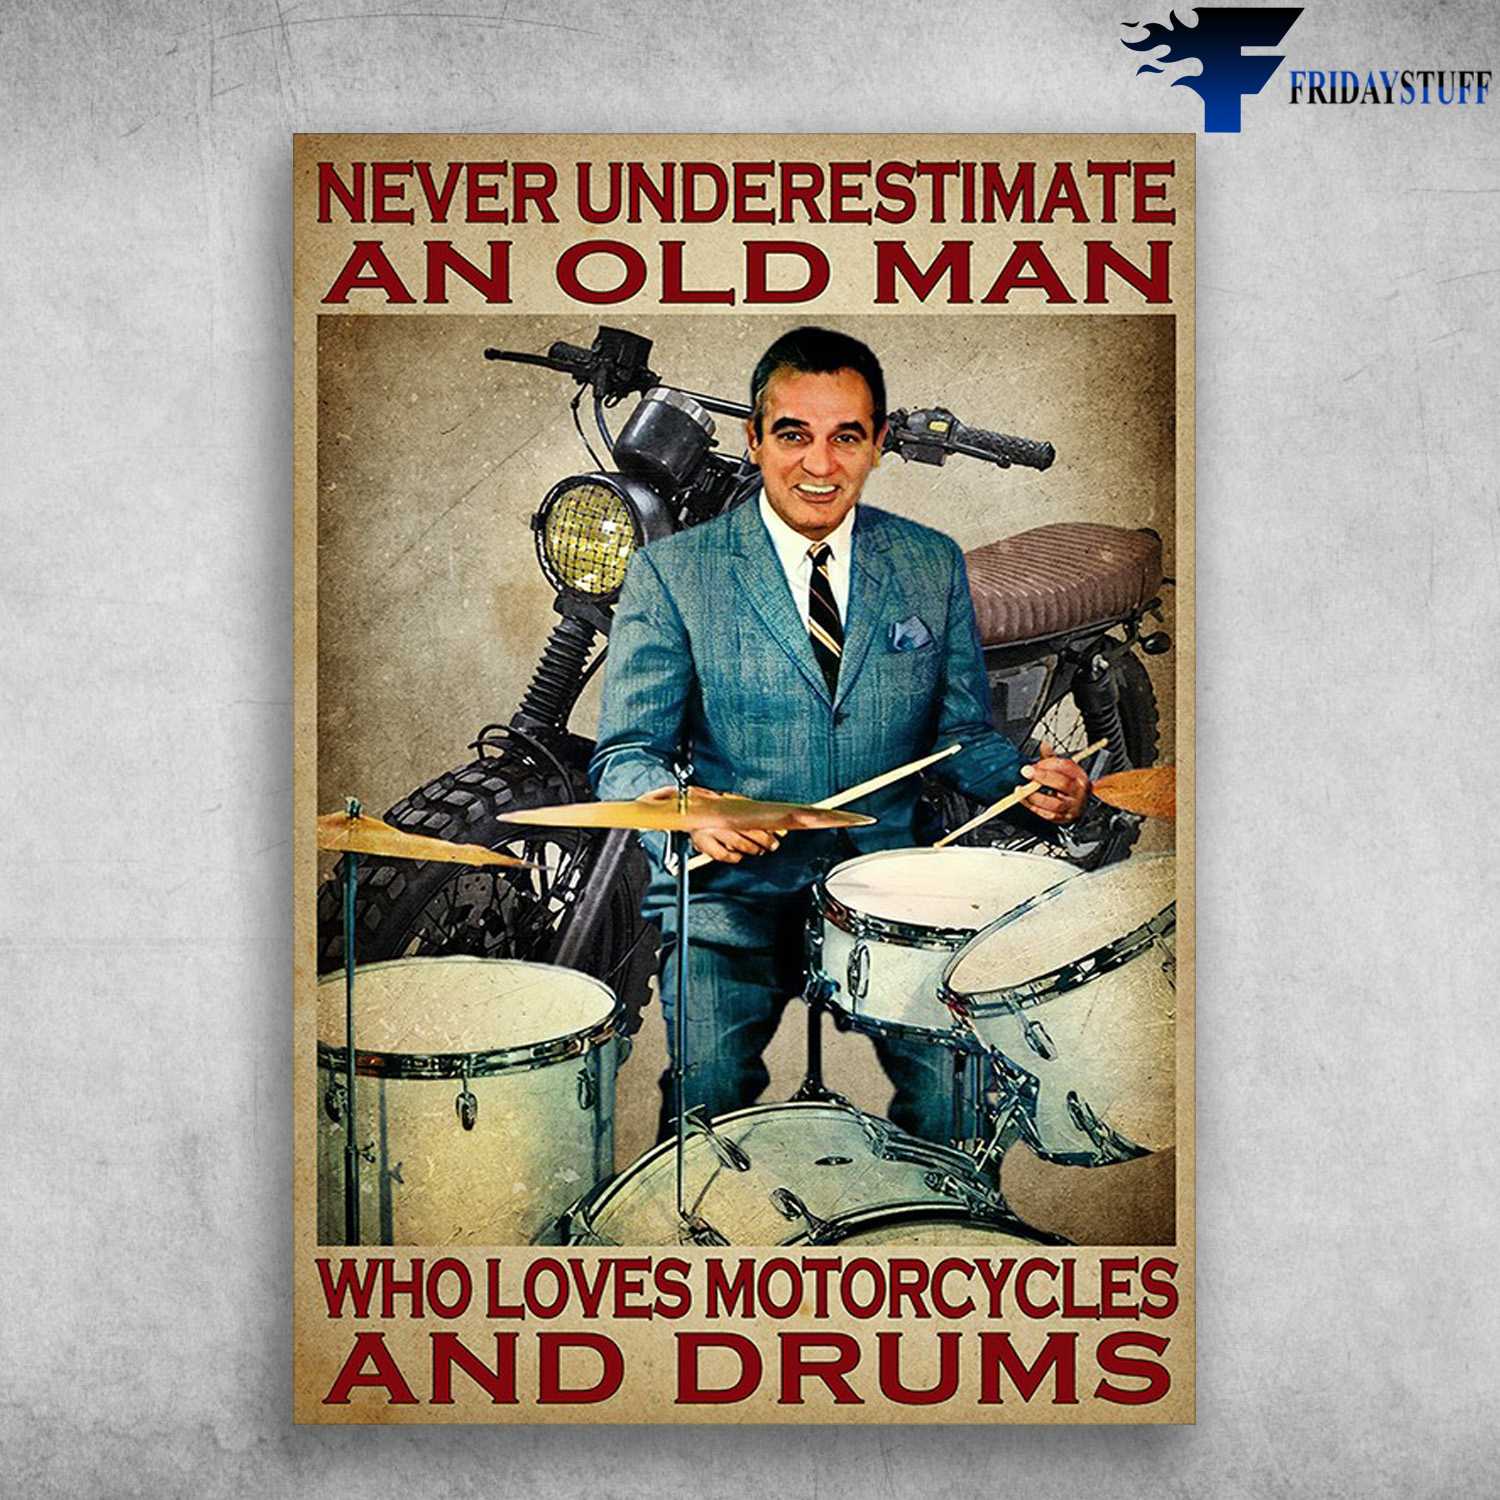 Drum And Motorcycle - Never Underestimate An Old Man, Who Loves Motorcycle And Drums, Biker Drum